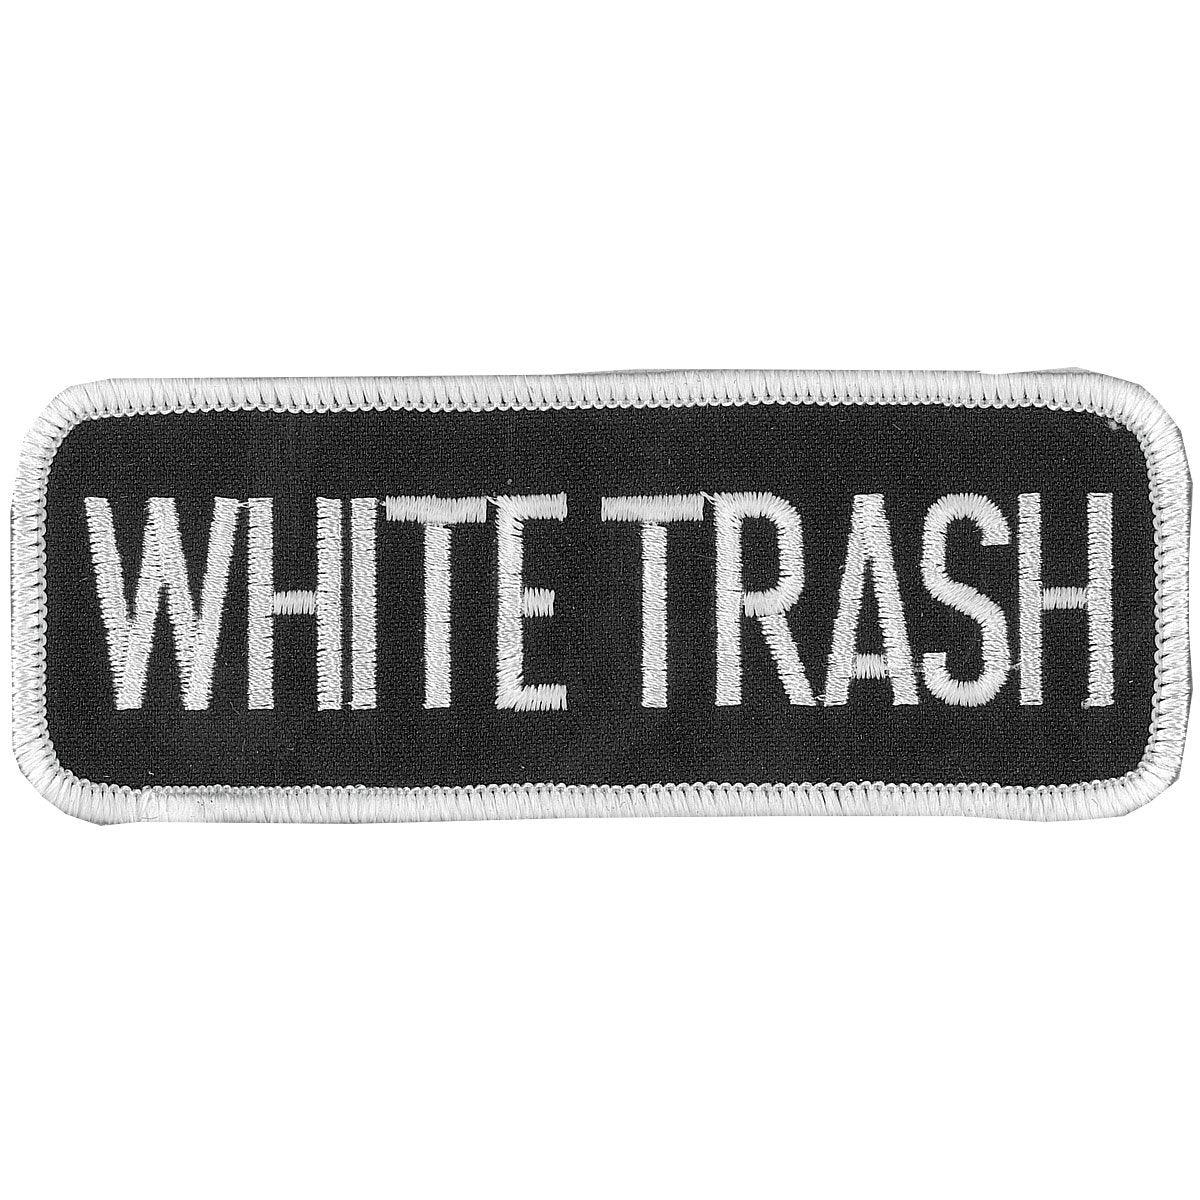 Hot Leathers White Trash 4" X 2" Patch - American Legend Rider